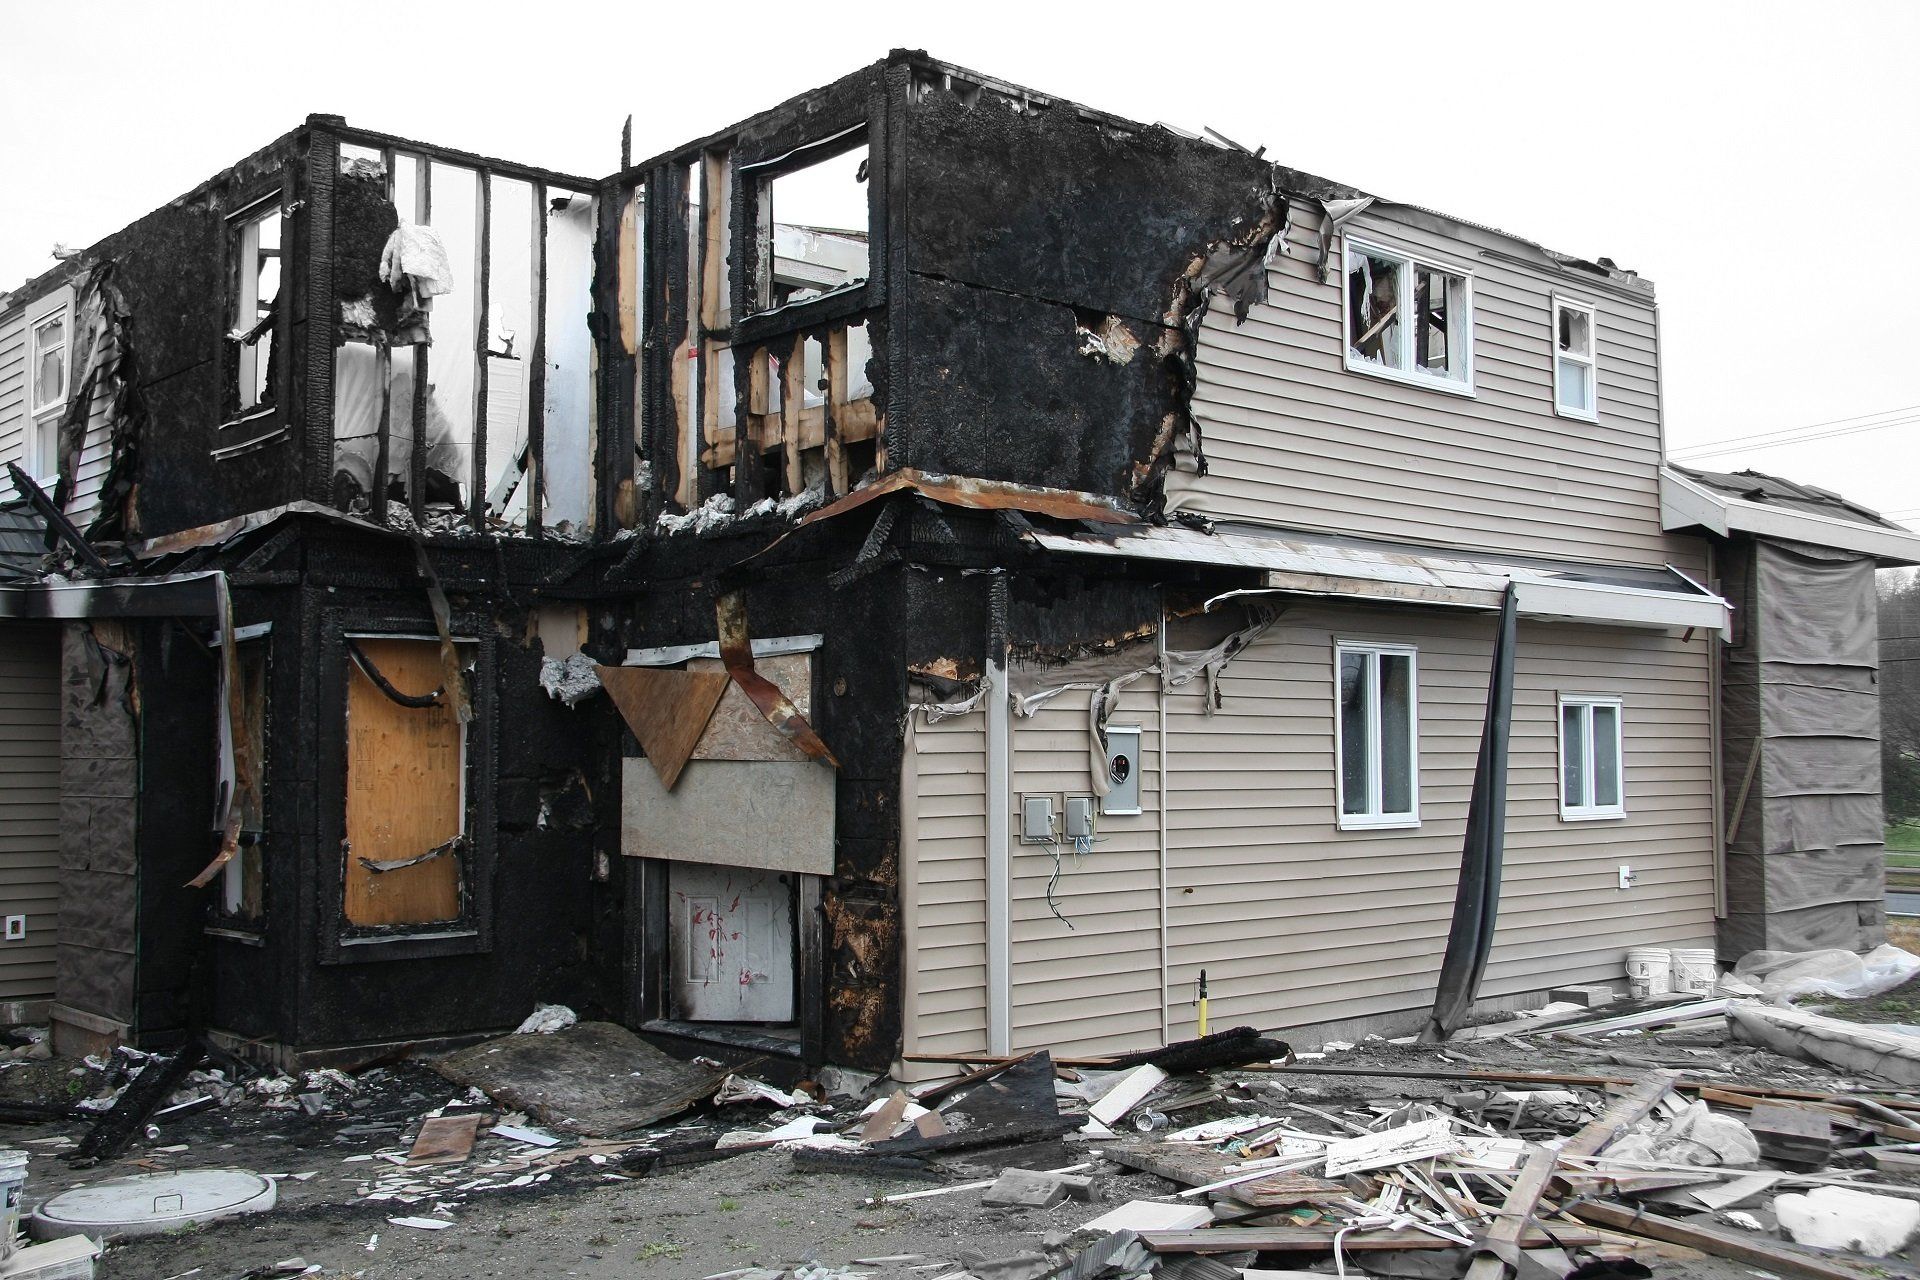 How To File Your Smoke Damage Insurance Claims?